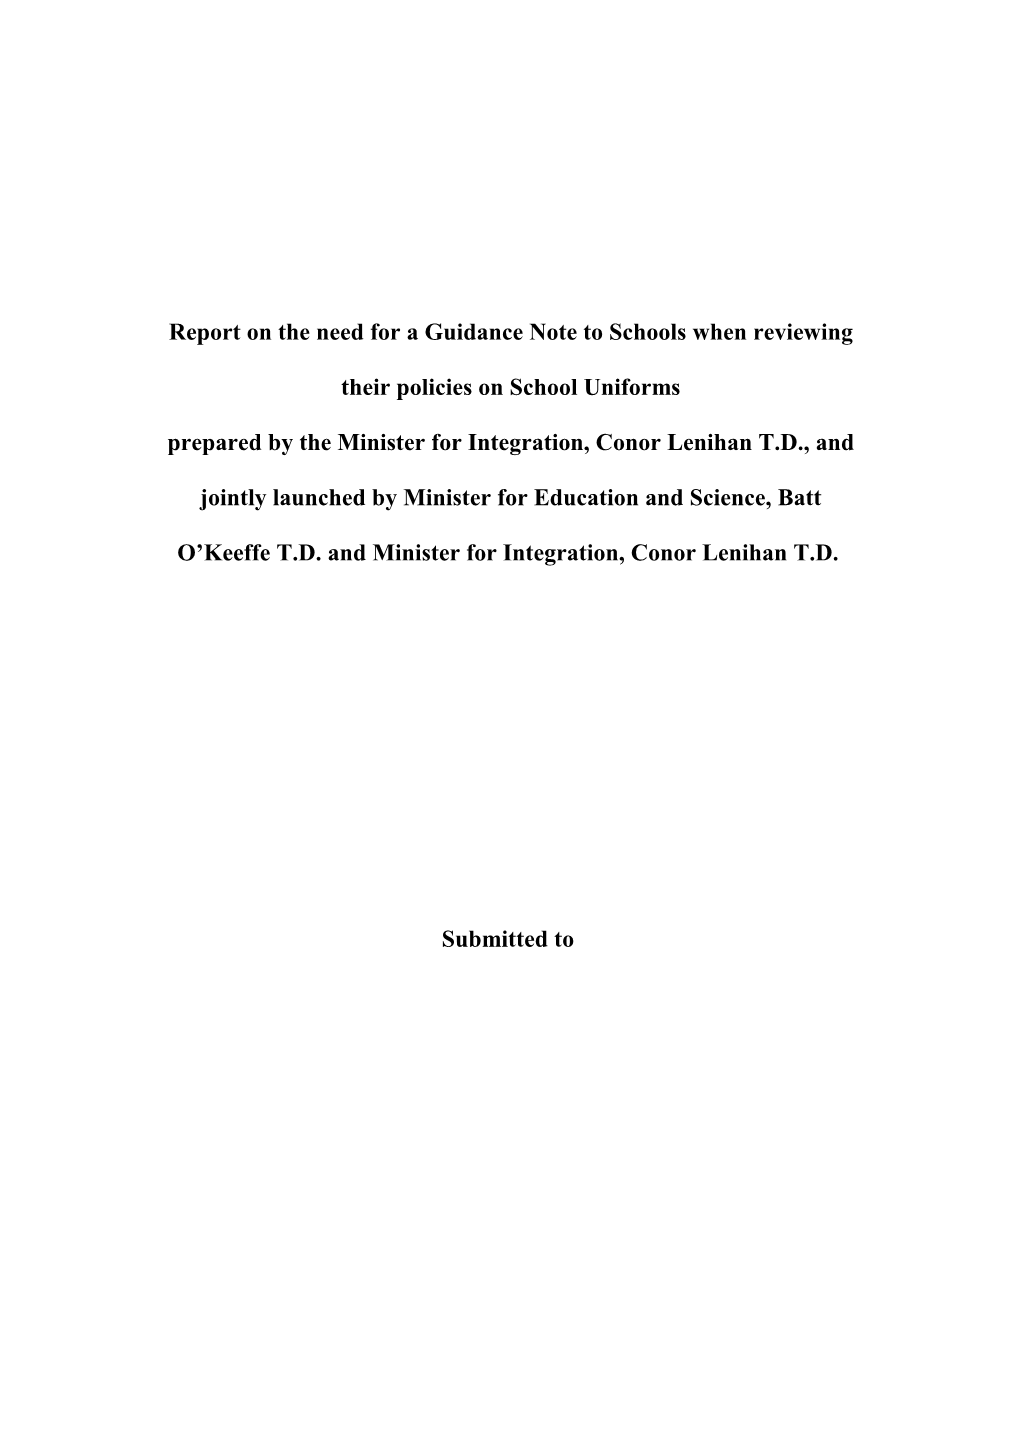 Report by the Minister for Integration, Conor Lenihan TD, on the Need for a Guidance Note